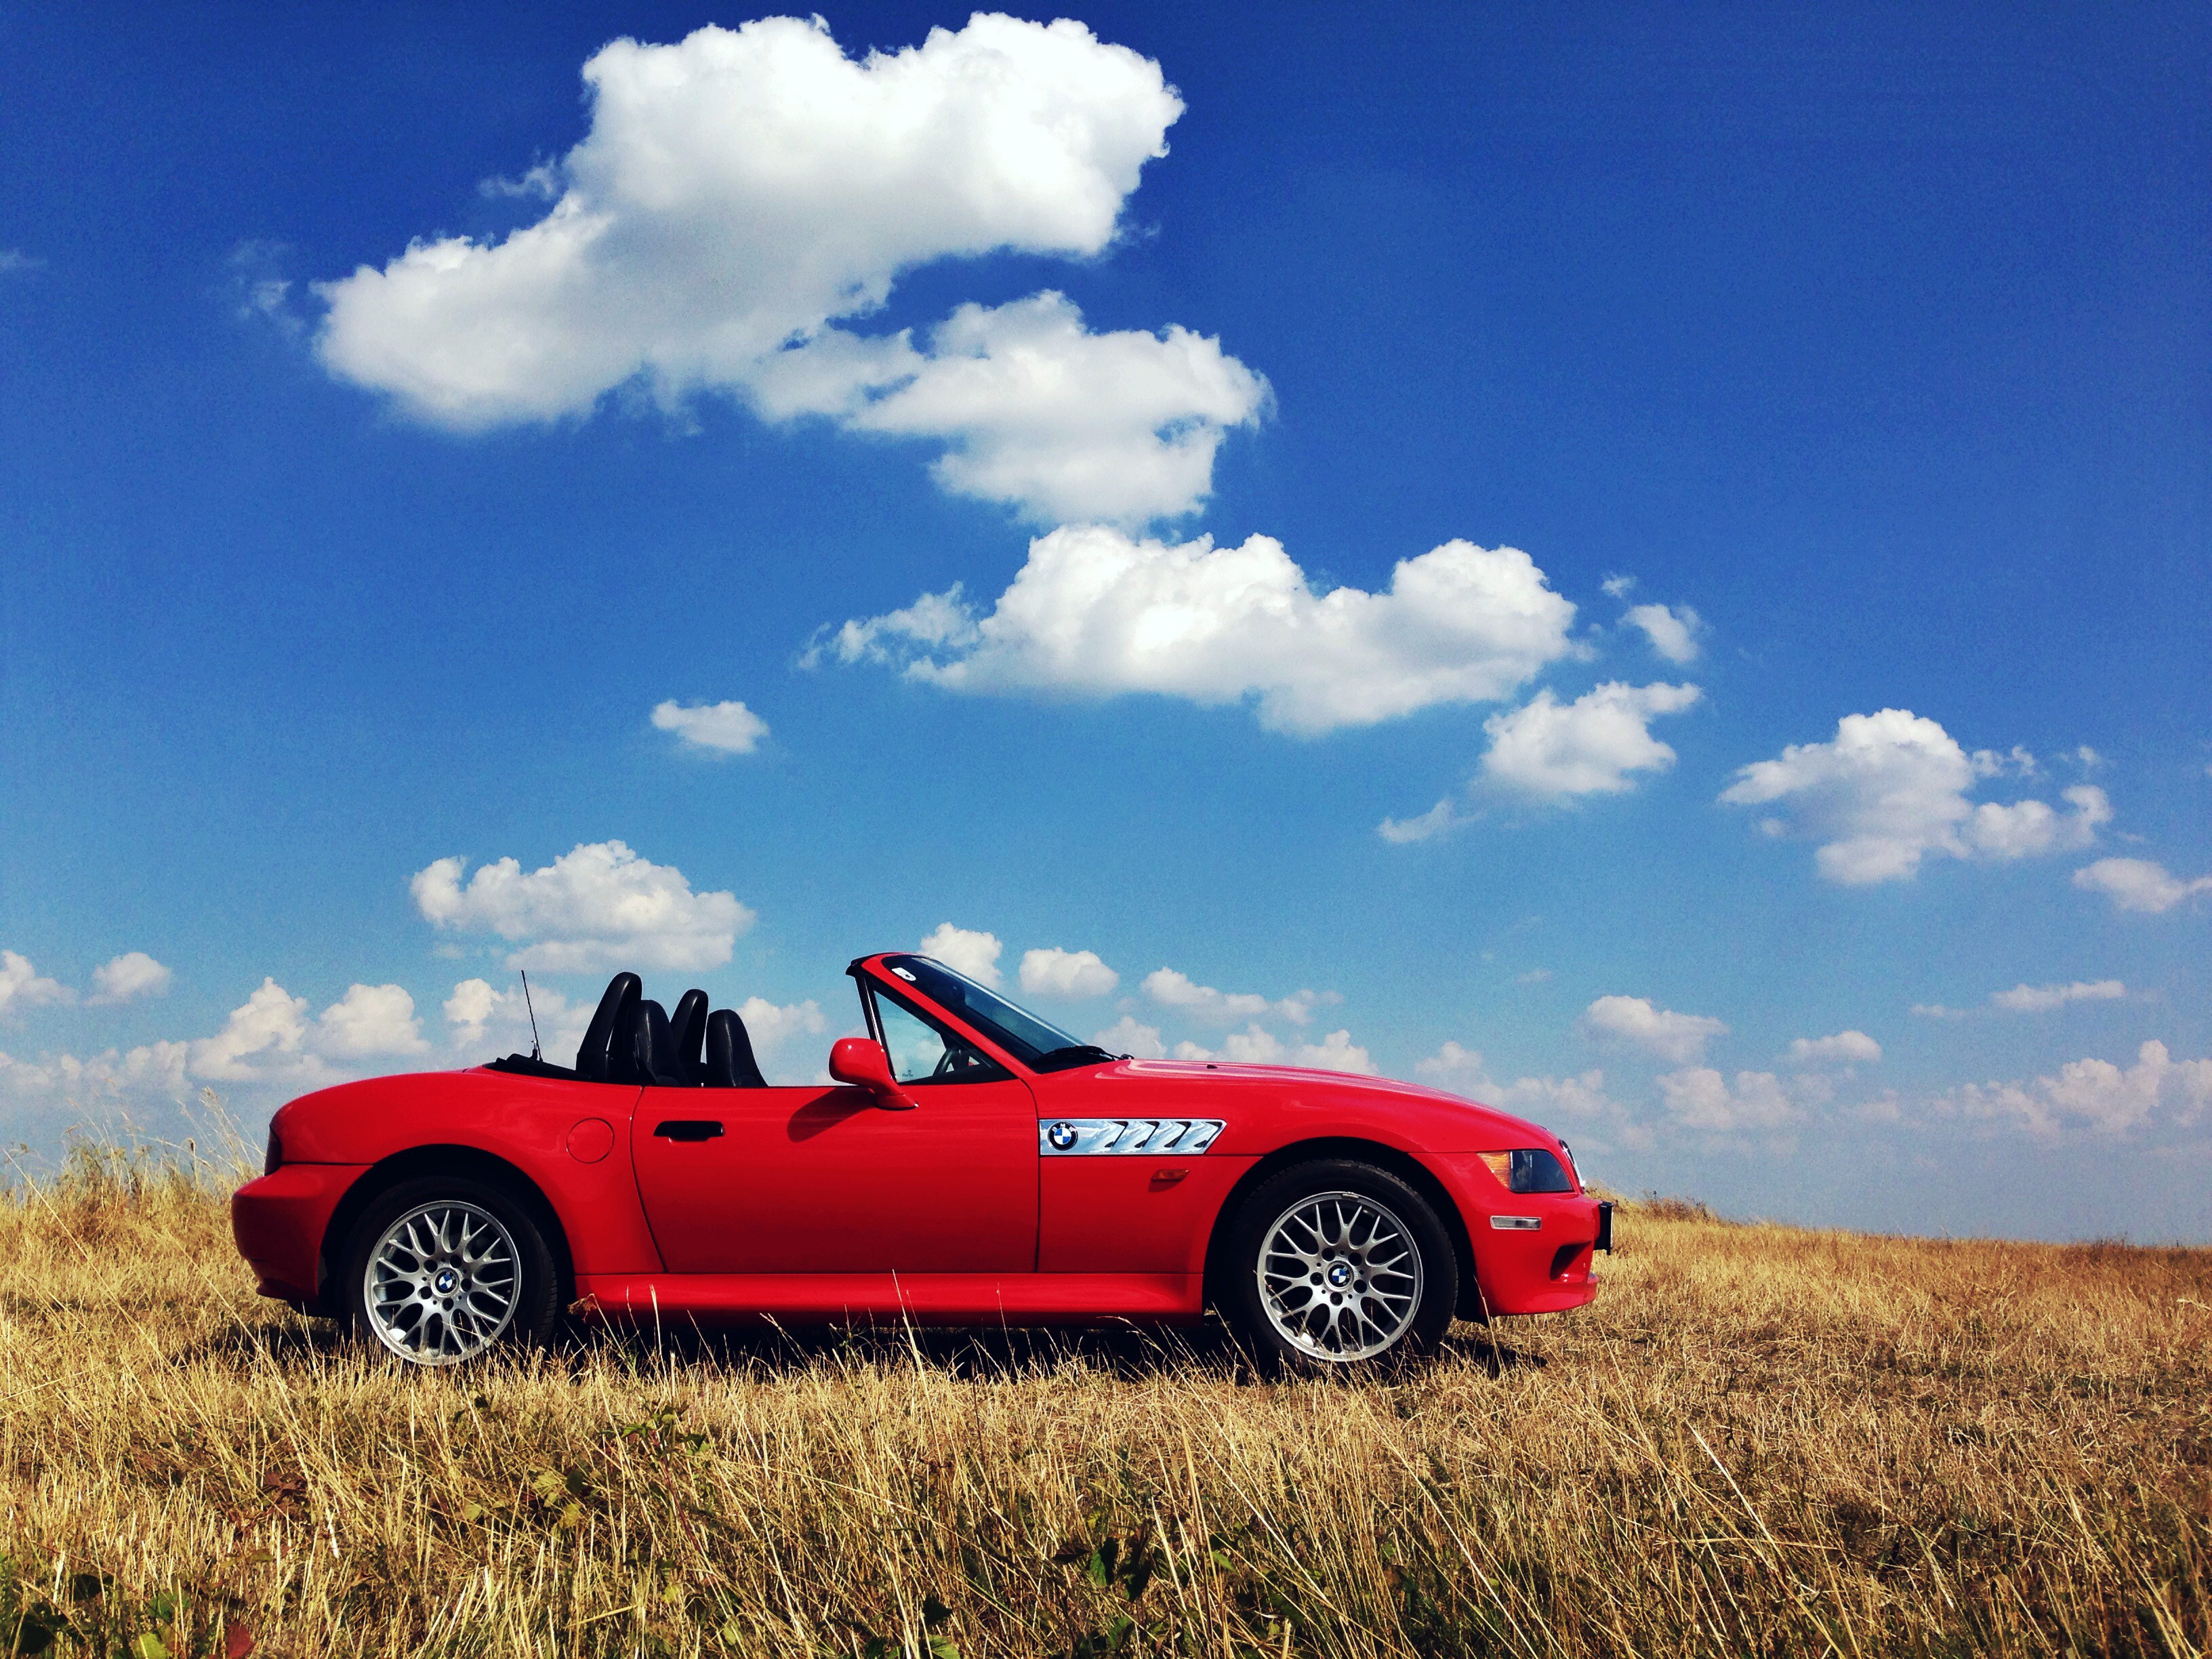 General 3264x2448 BMW BMW Z3 car cabrio red cars clear sky Roadster vehicle German cars convertible